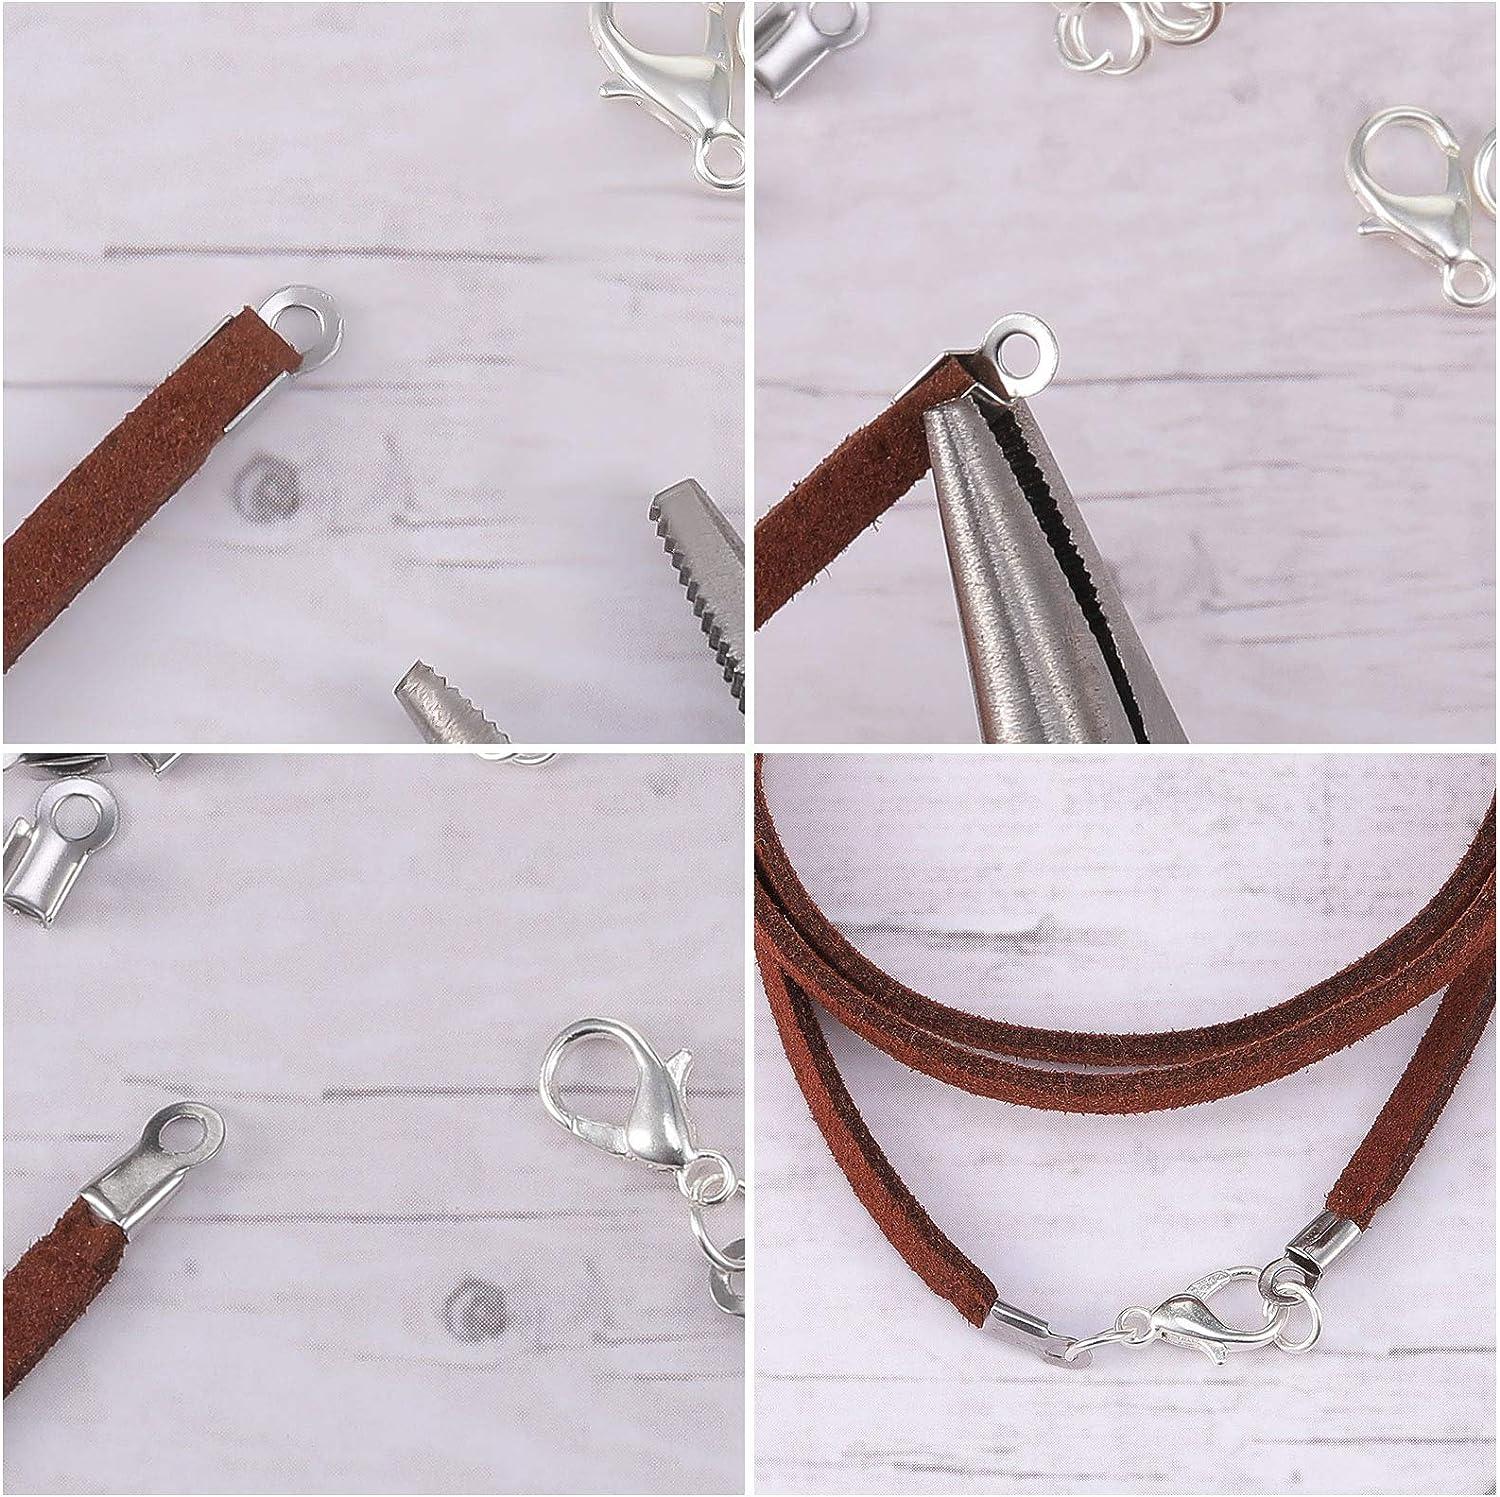 30 Pcs Stainless Steel Silver Fold Over Crimp Cord End Findings Leather  Clasp Tip End for Jewelry Making DIY Bracelet Necklace Connector 